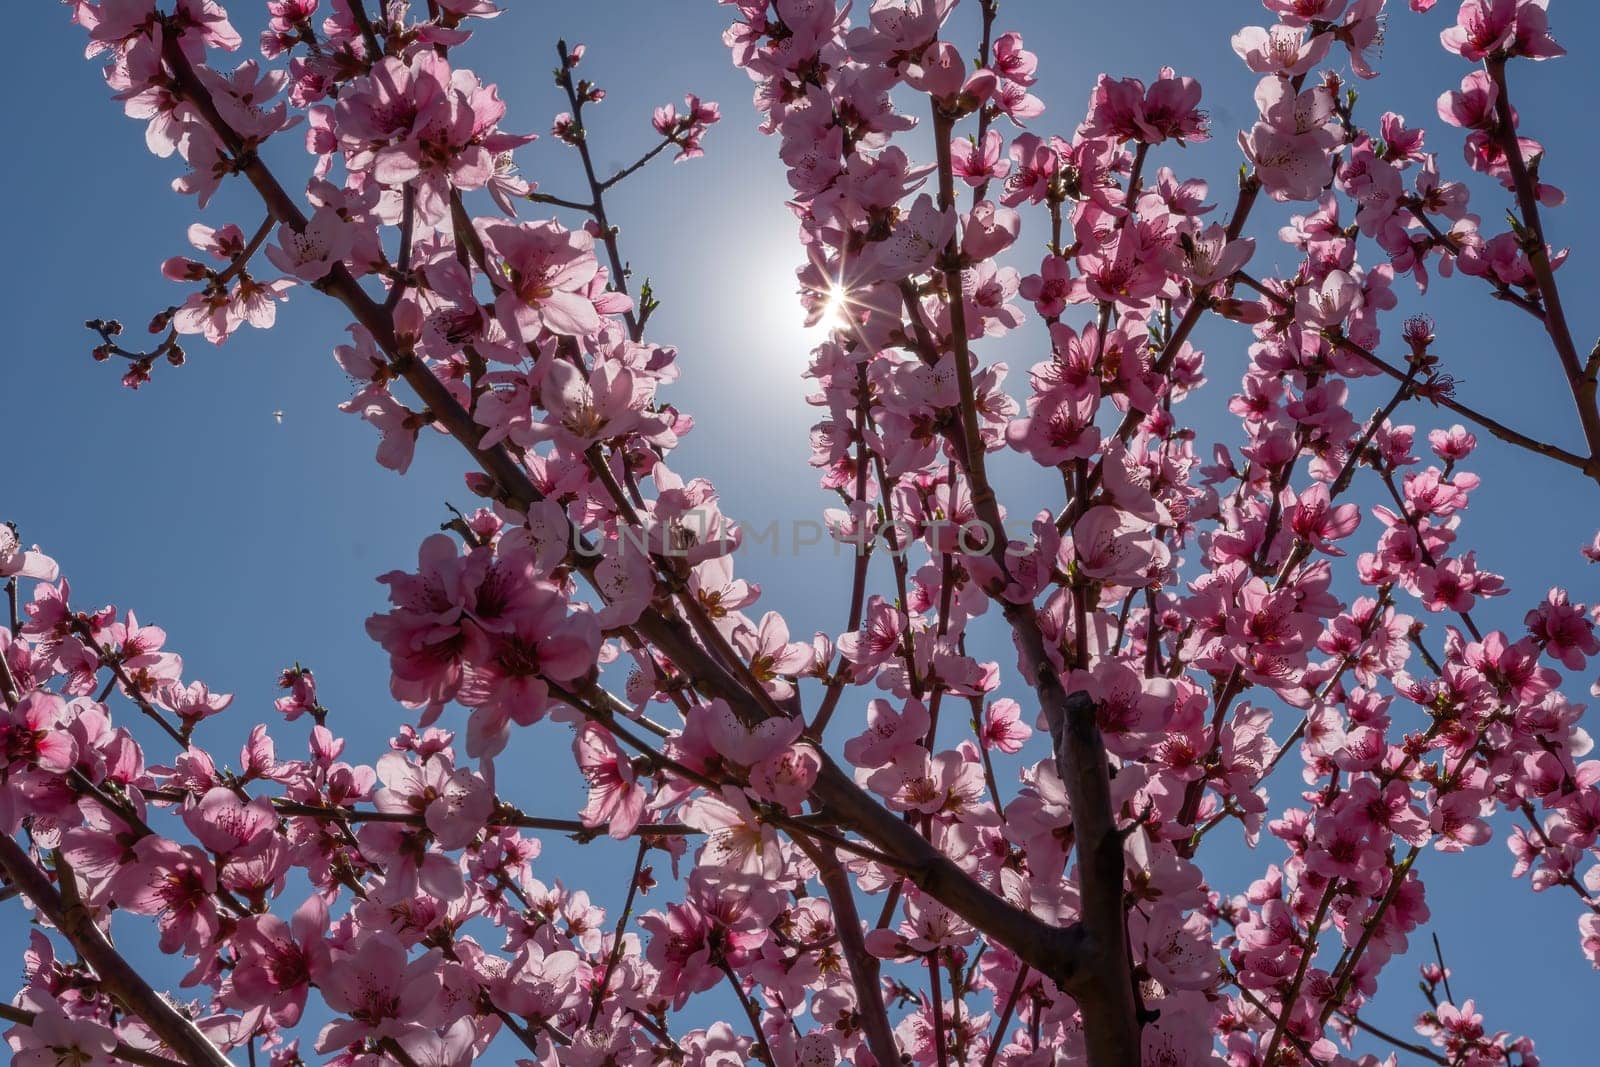 peach tree with pink flowers and a blue sky. The sun is shining on the tree